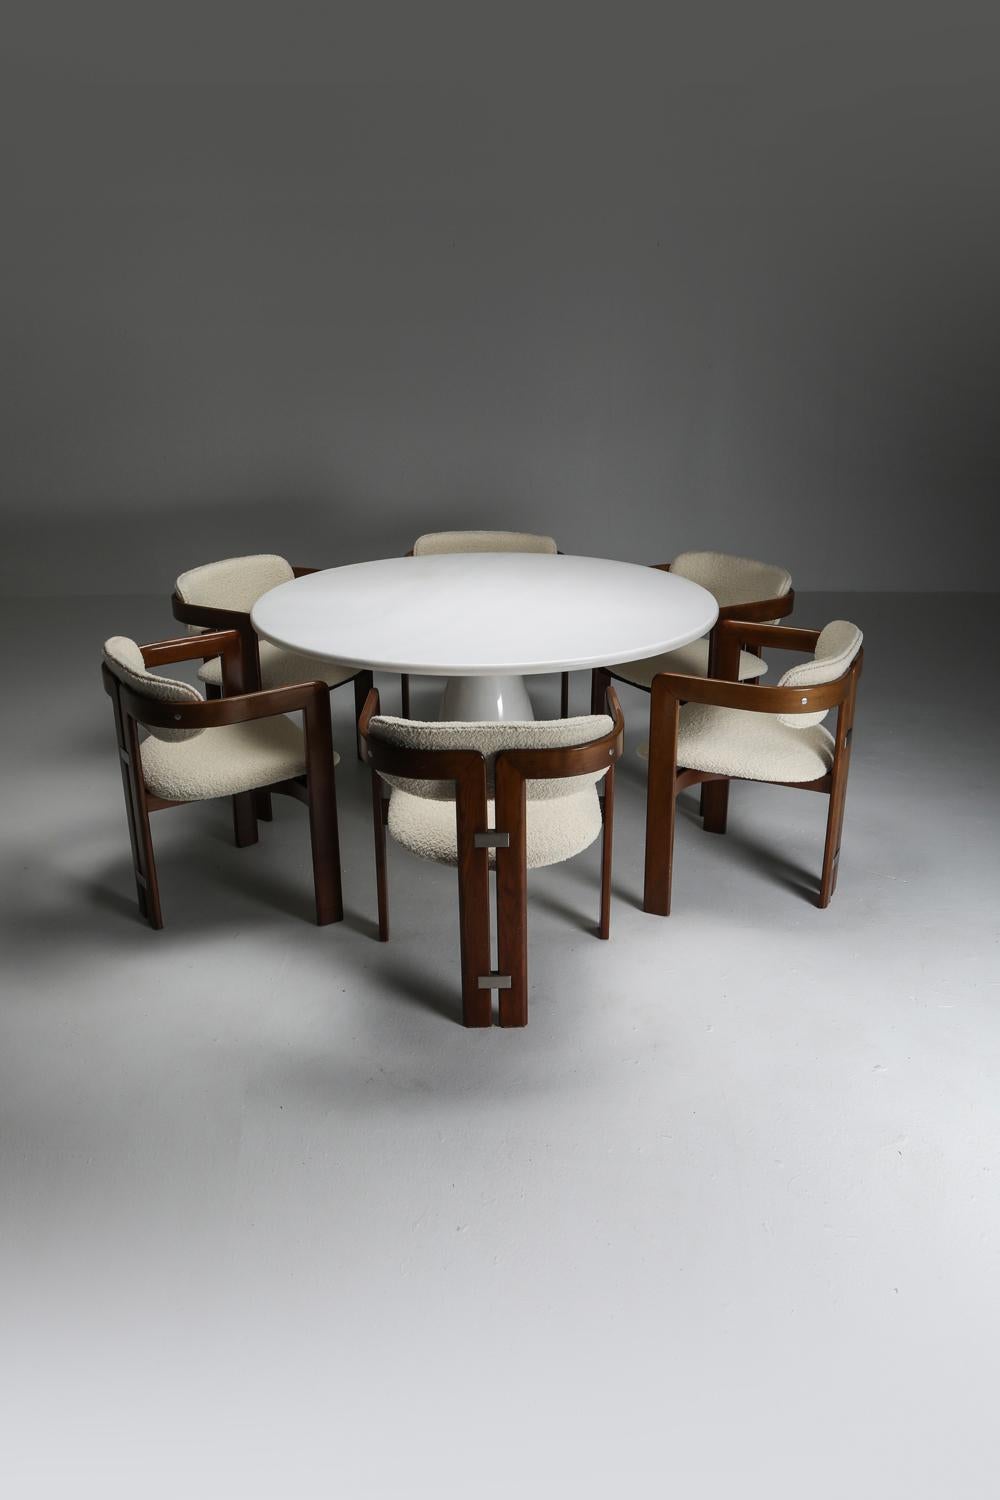 German White Calacatta 'Finale' Marble Dining Table by Peter Draenhert